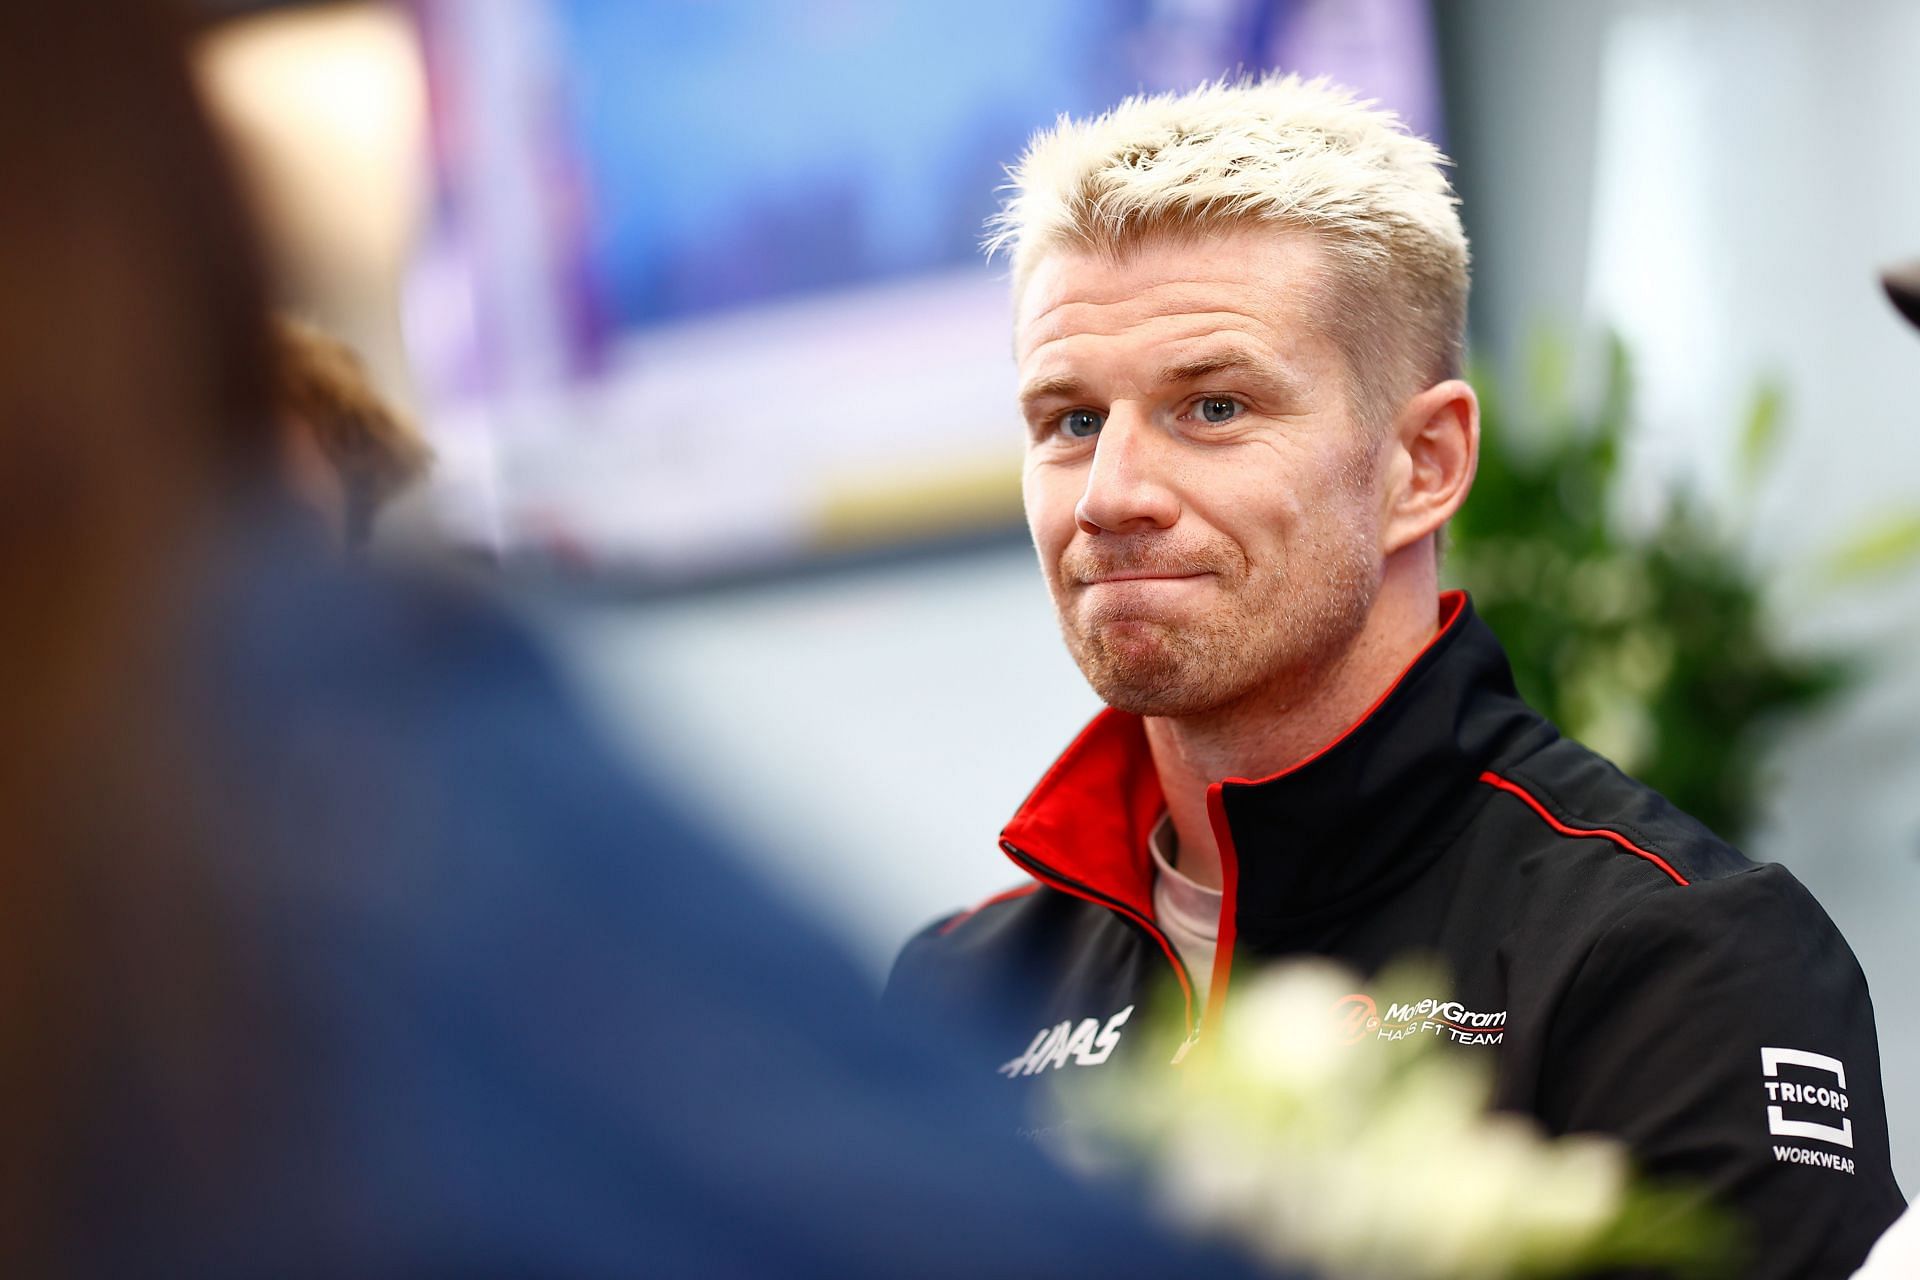 Nico Hulkenberg carrying out media duties ahead of the 2023 Dutch Grand Prix at the Zandvoort circuit. (Image courtesy- Haas F1 team images)